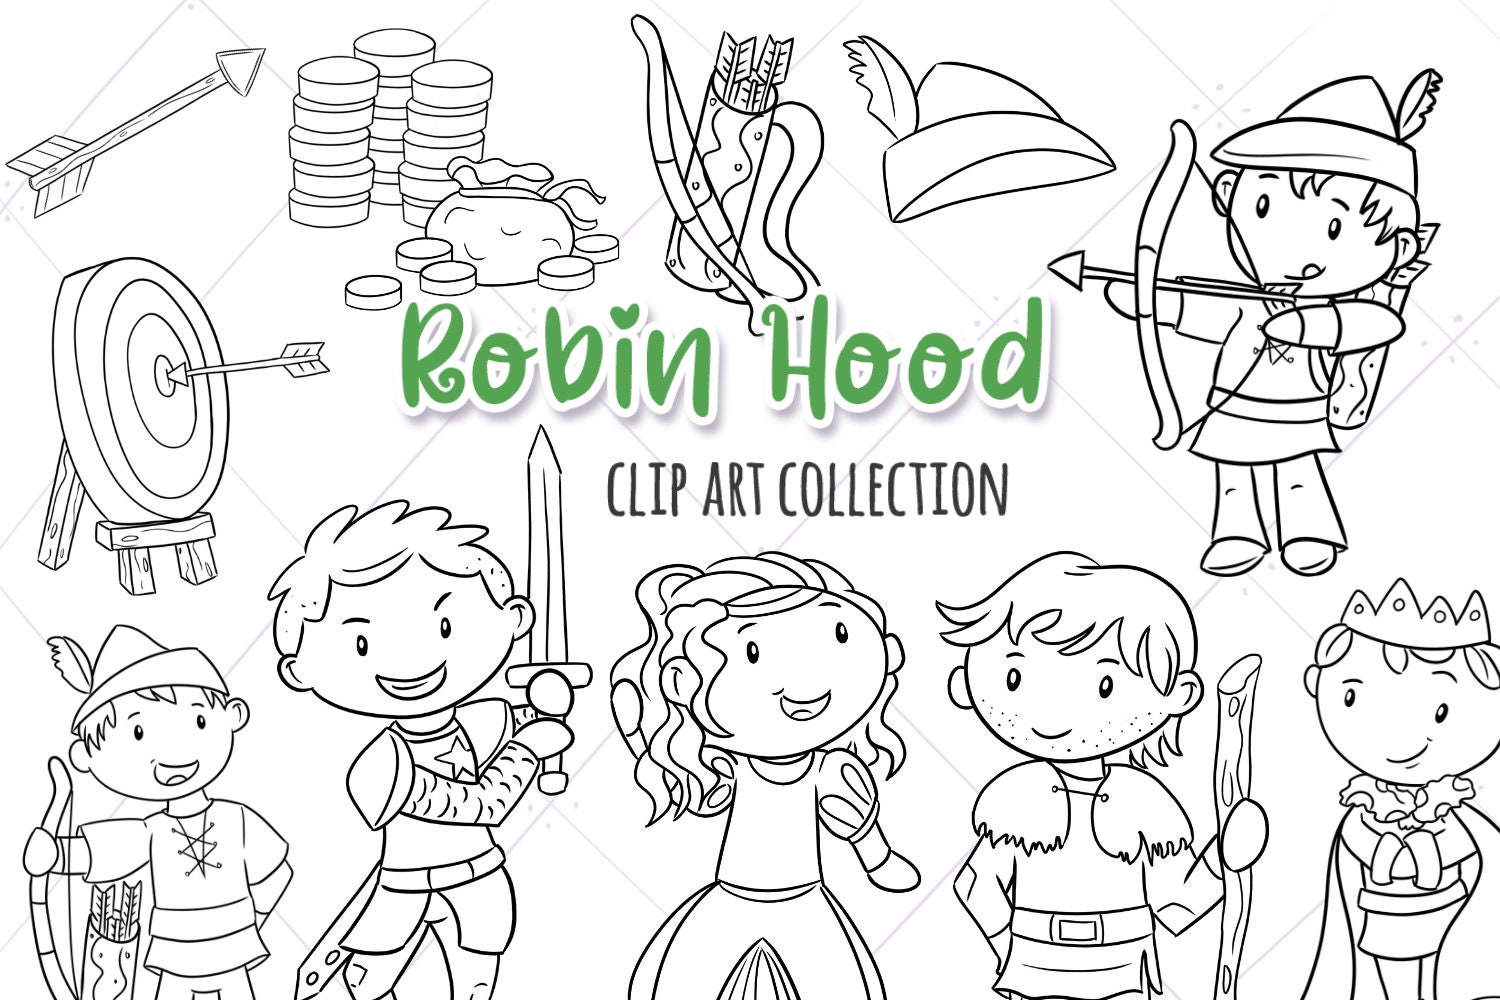 Premium Vector  Cartoon cat robin hood coloring book isolated on